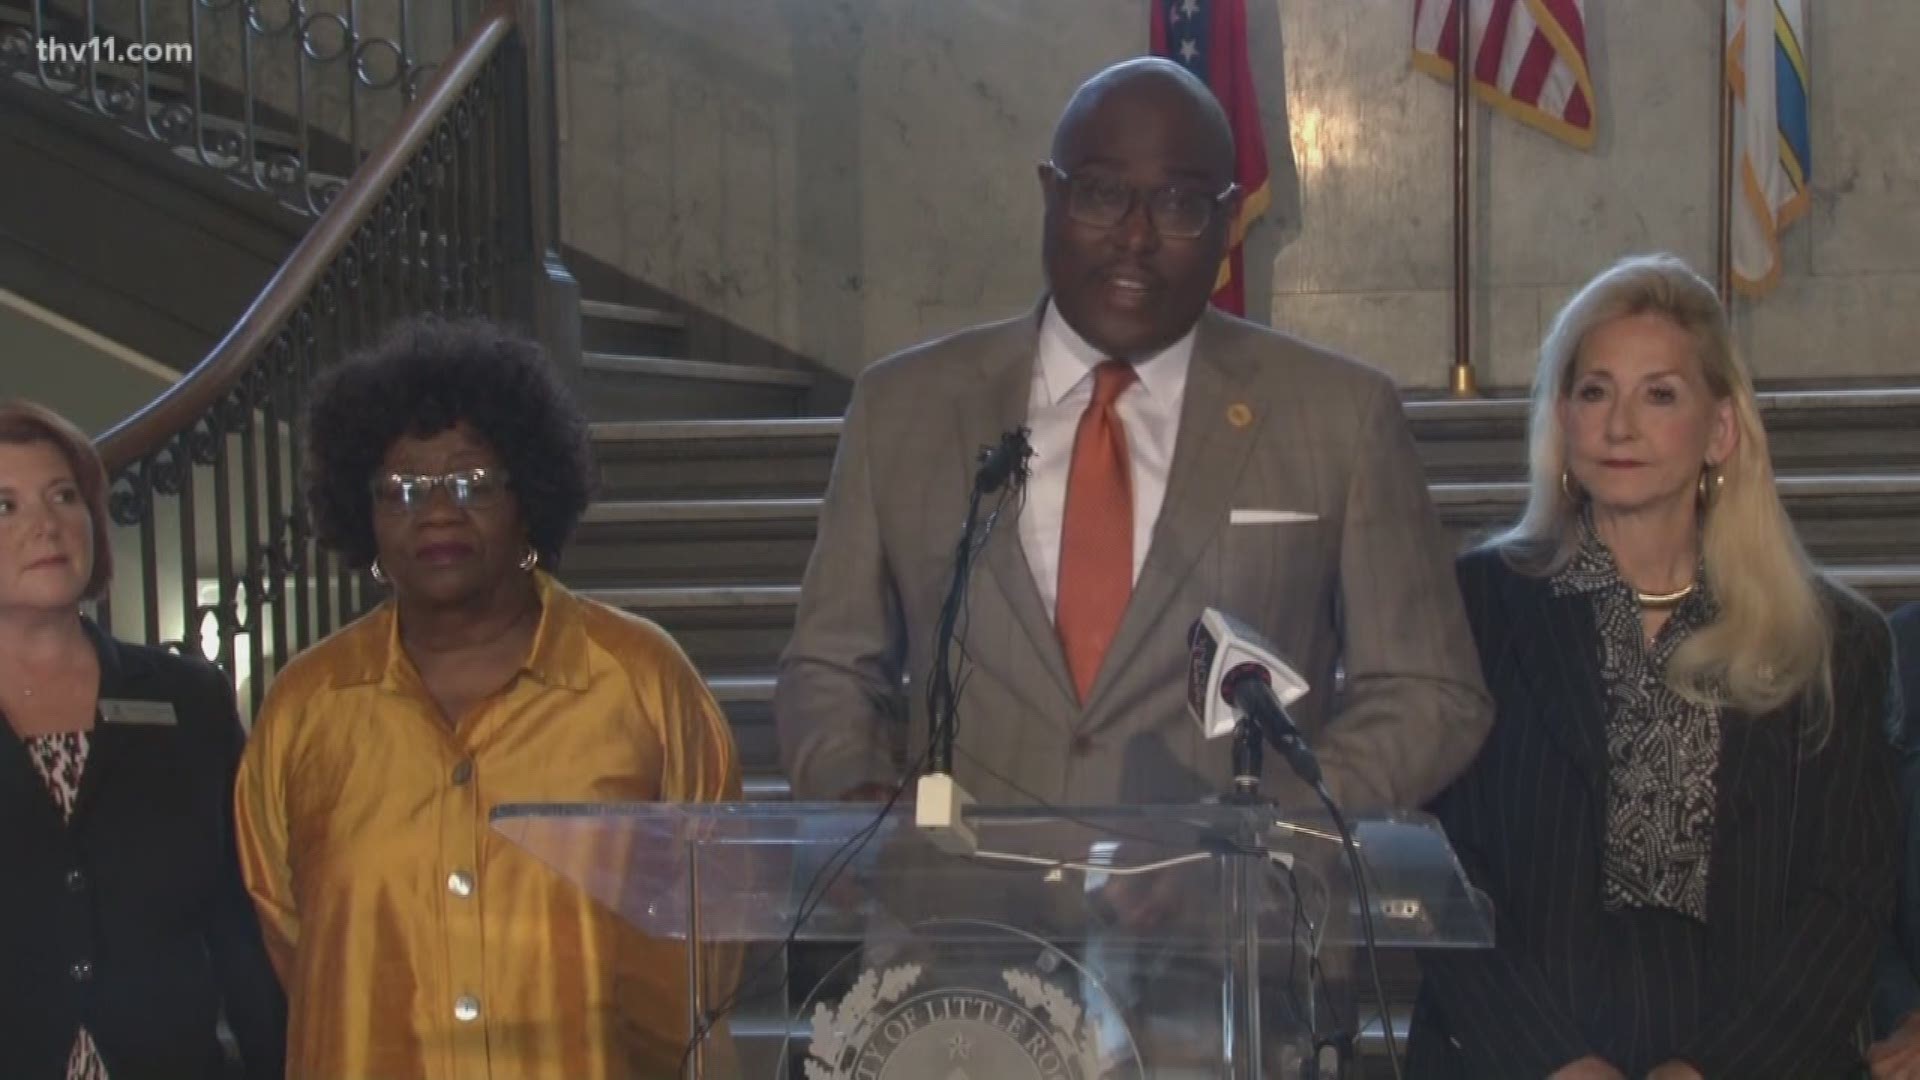 Mayor Frank Scott Jr. announced that the city wants "full and complete local control of the Little Rock School District."